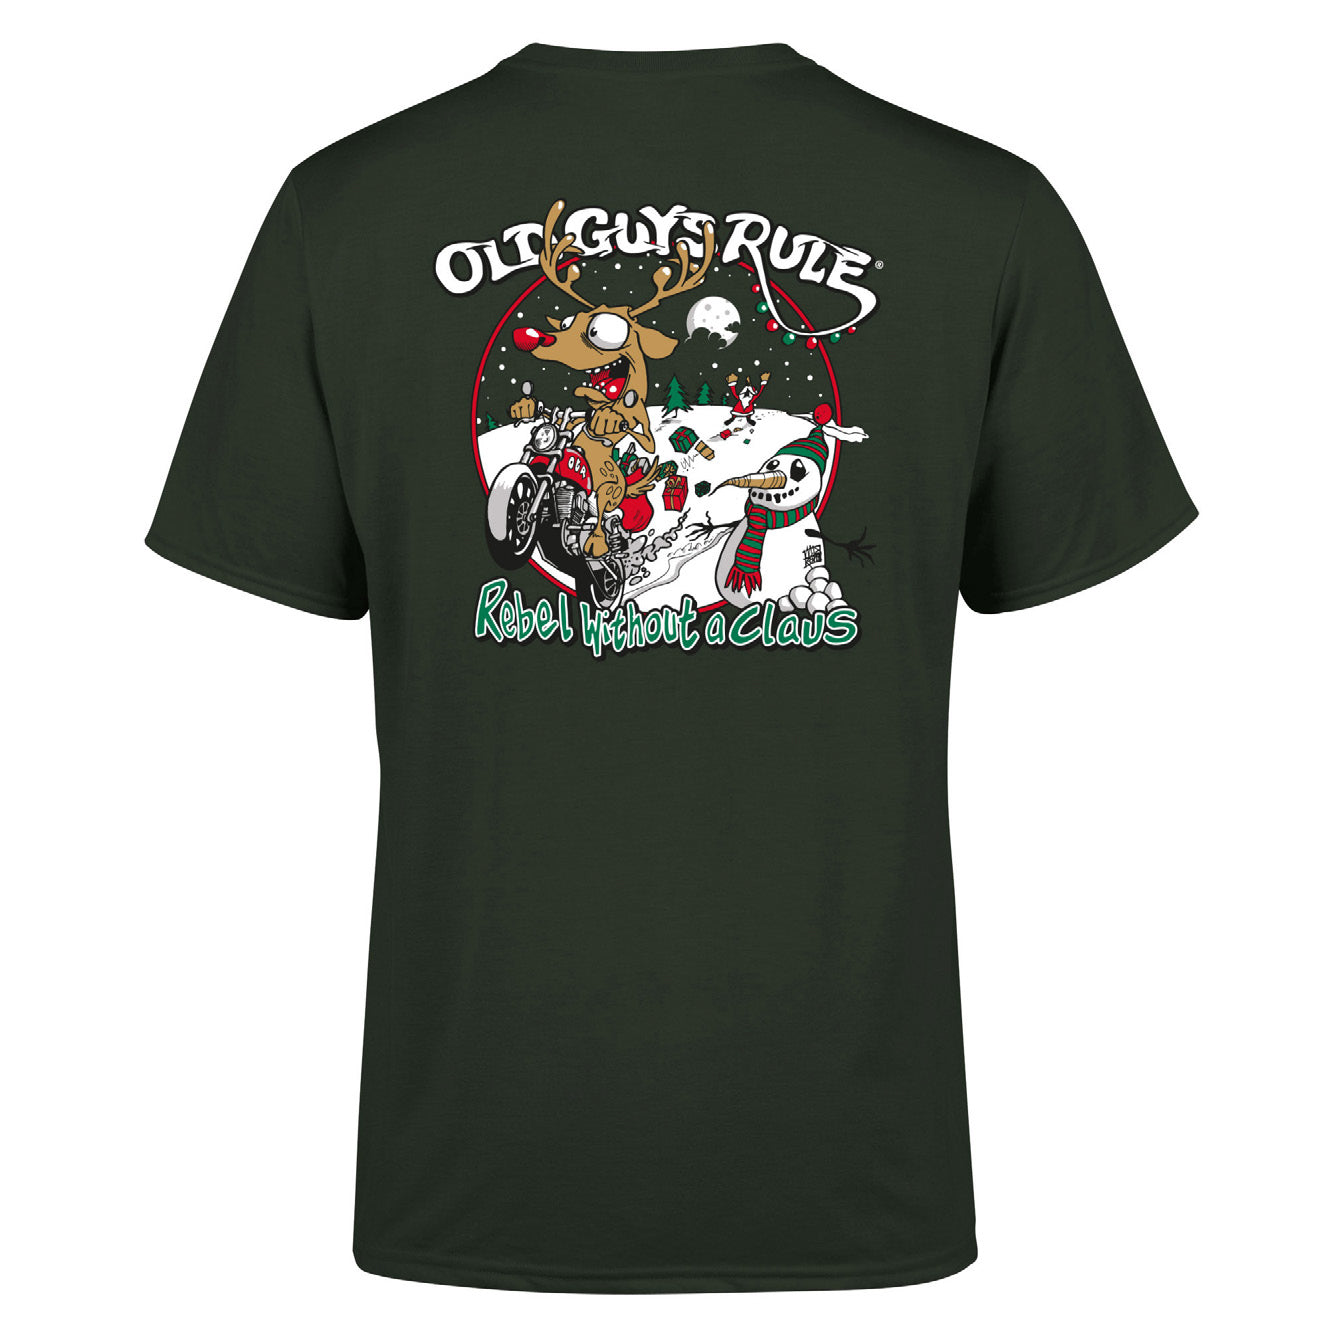 OLD GUYS RULE 'REBEL WITHOUT A CLAUSE' T-SHIRT - *LIMITED EDITION*